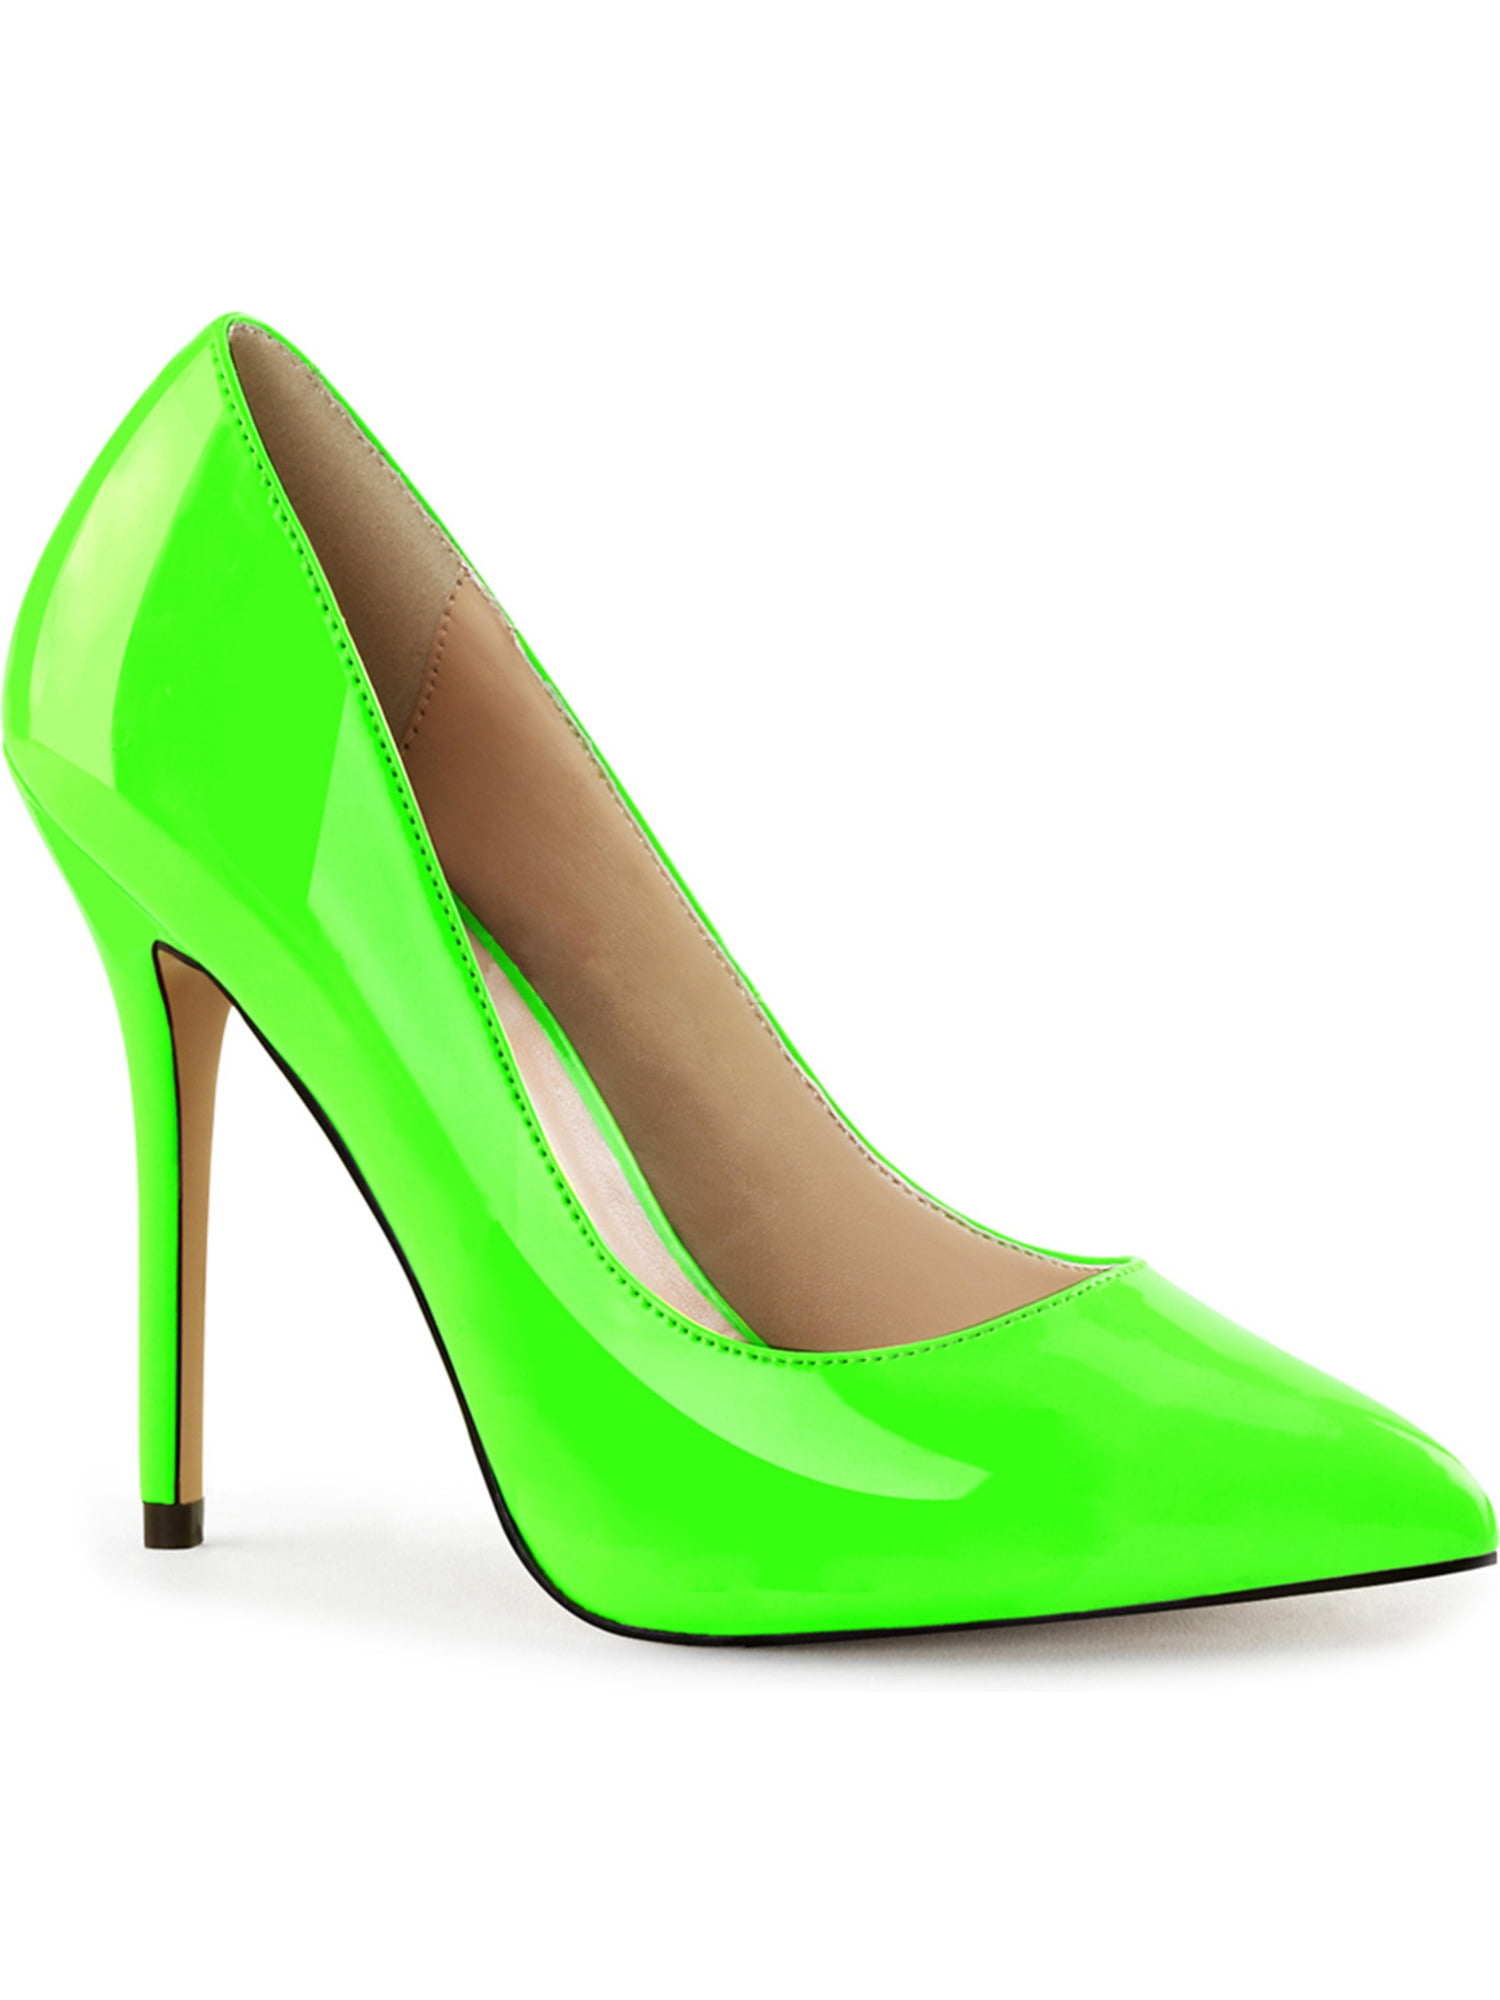 Pleaser - Womens Neon Green Shoes Pointed Toe Pumps Bright Patent ...